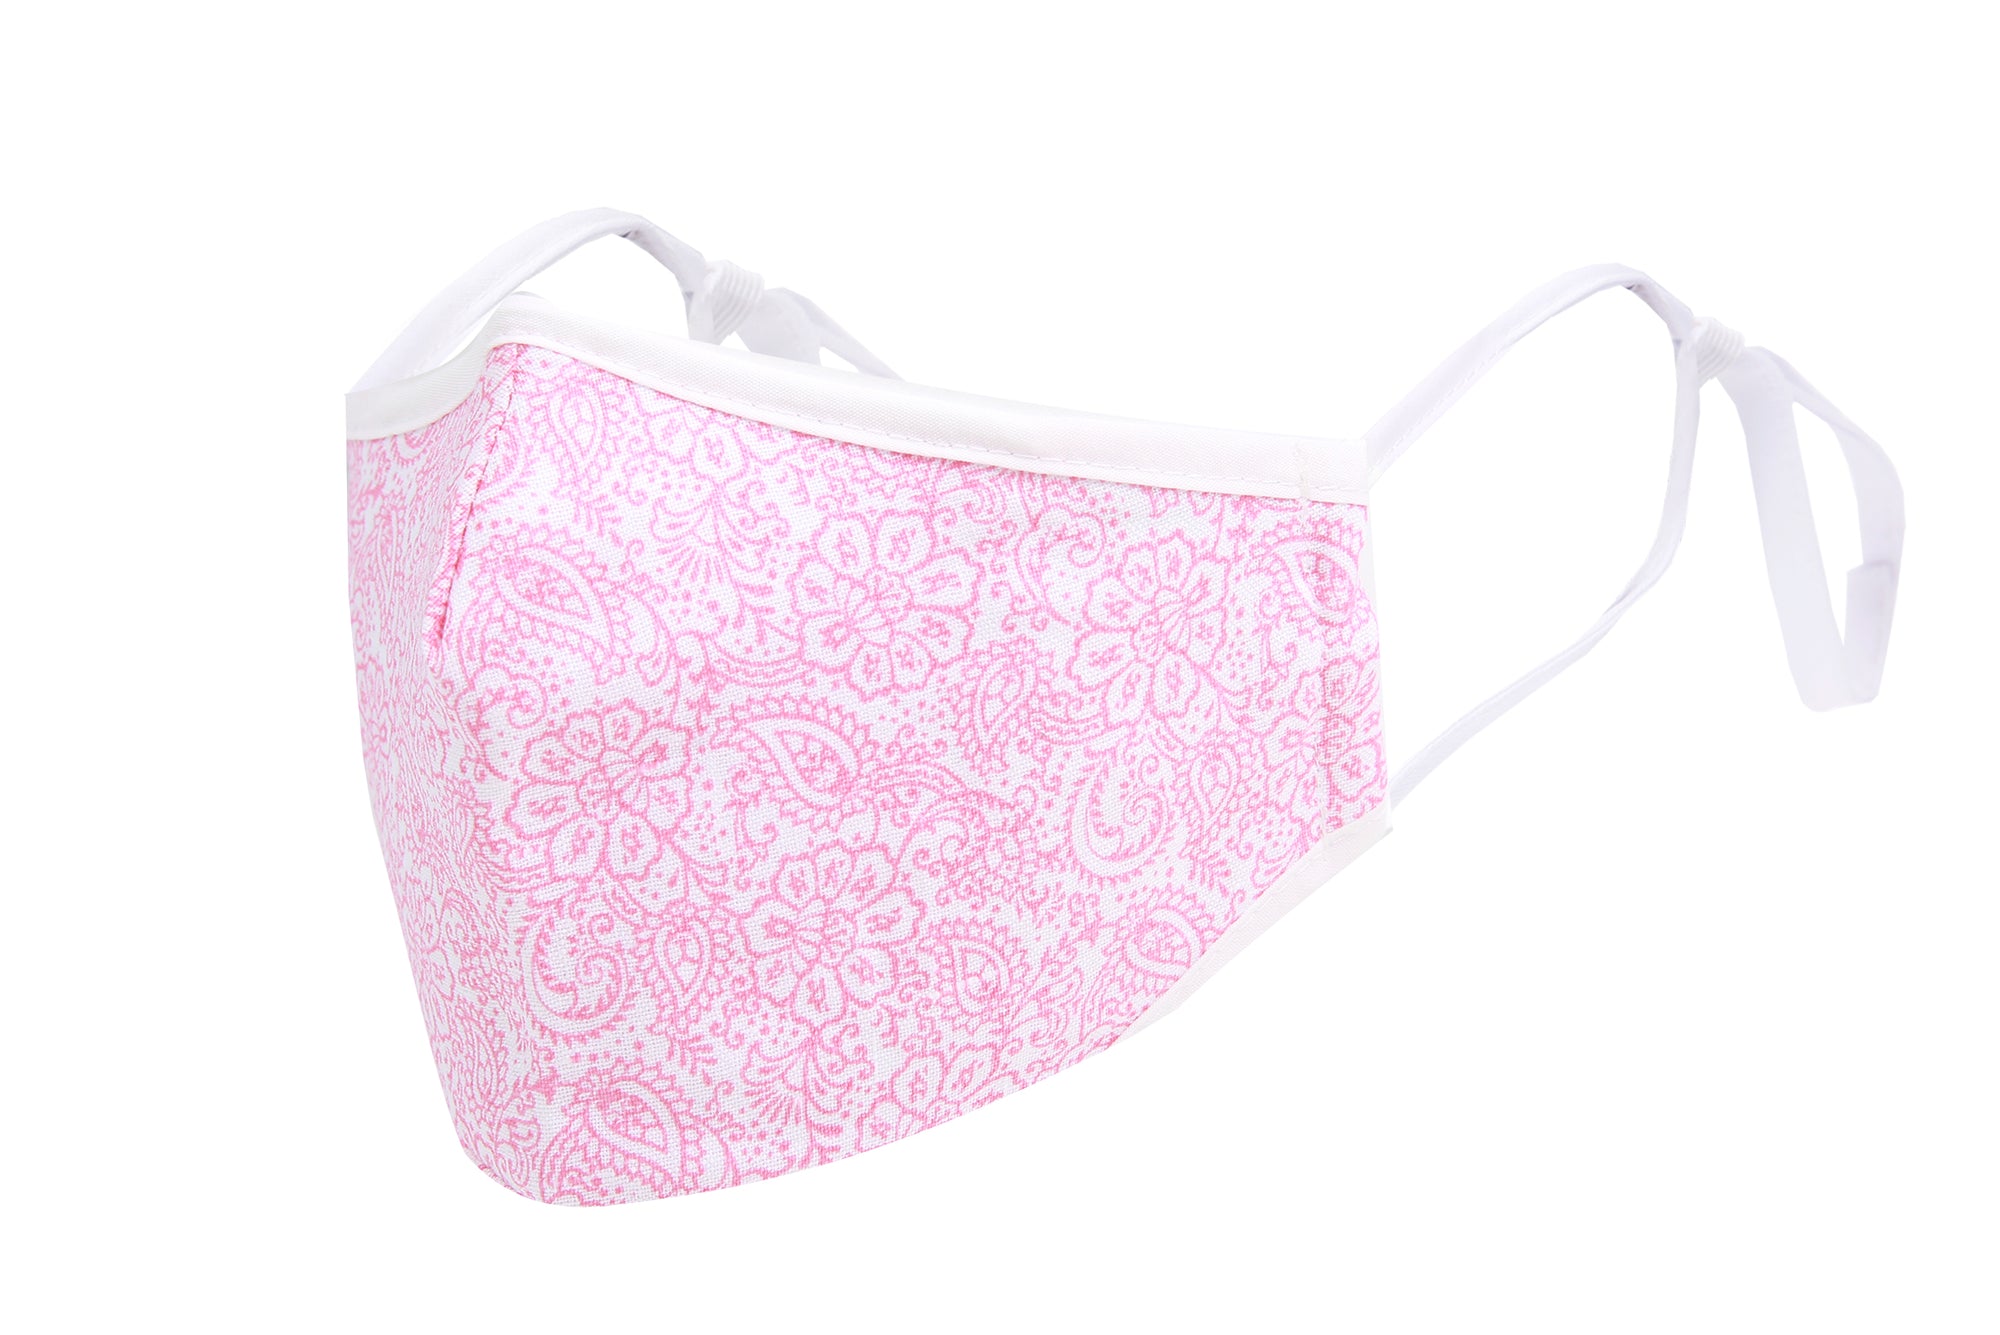 Fashionable Mask - Prettier In Pink